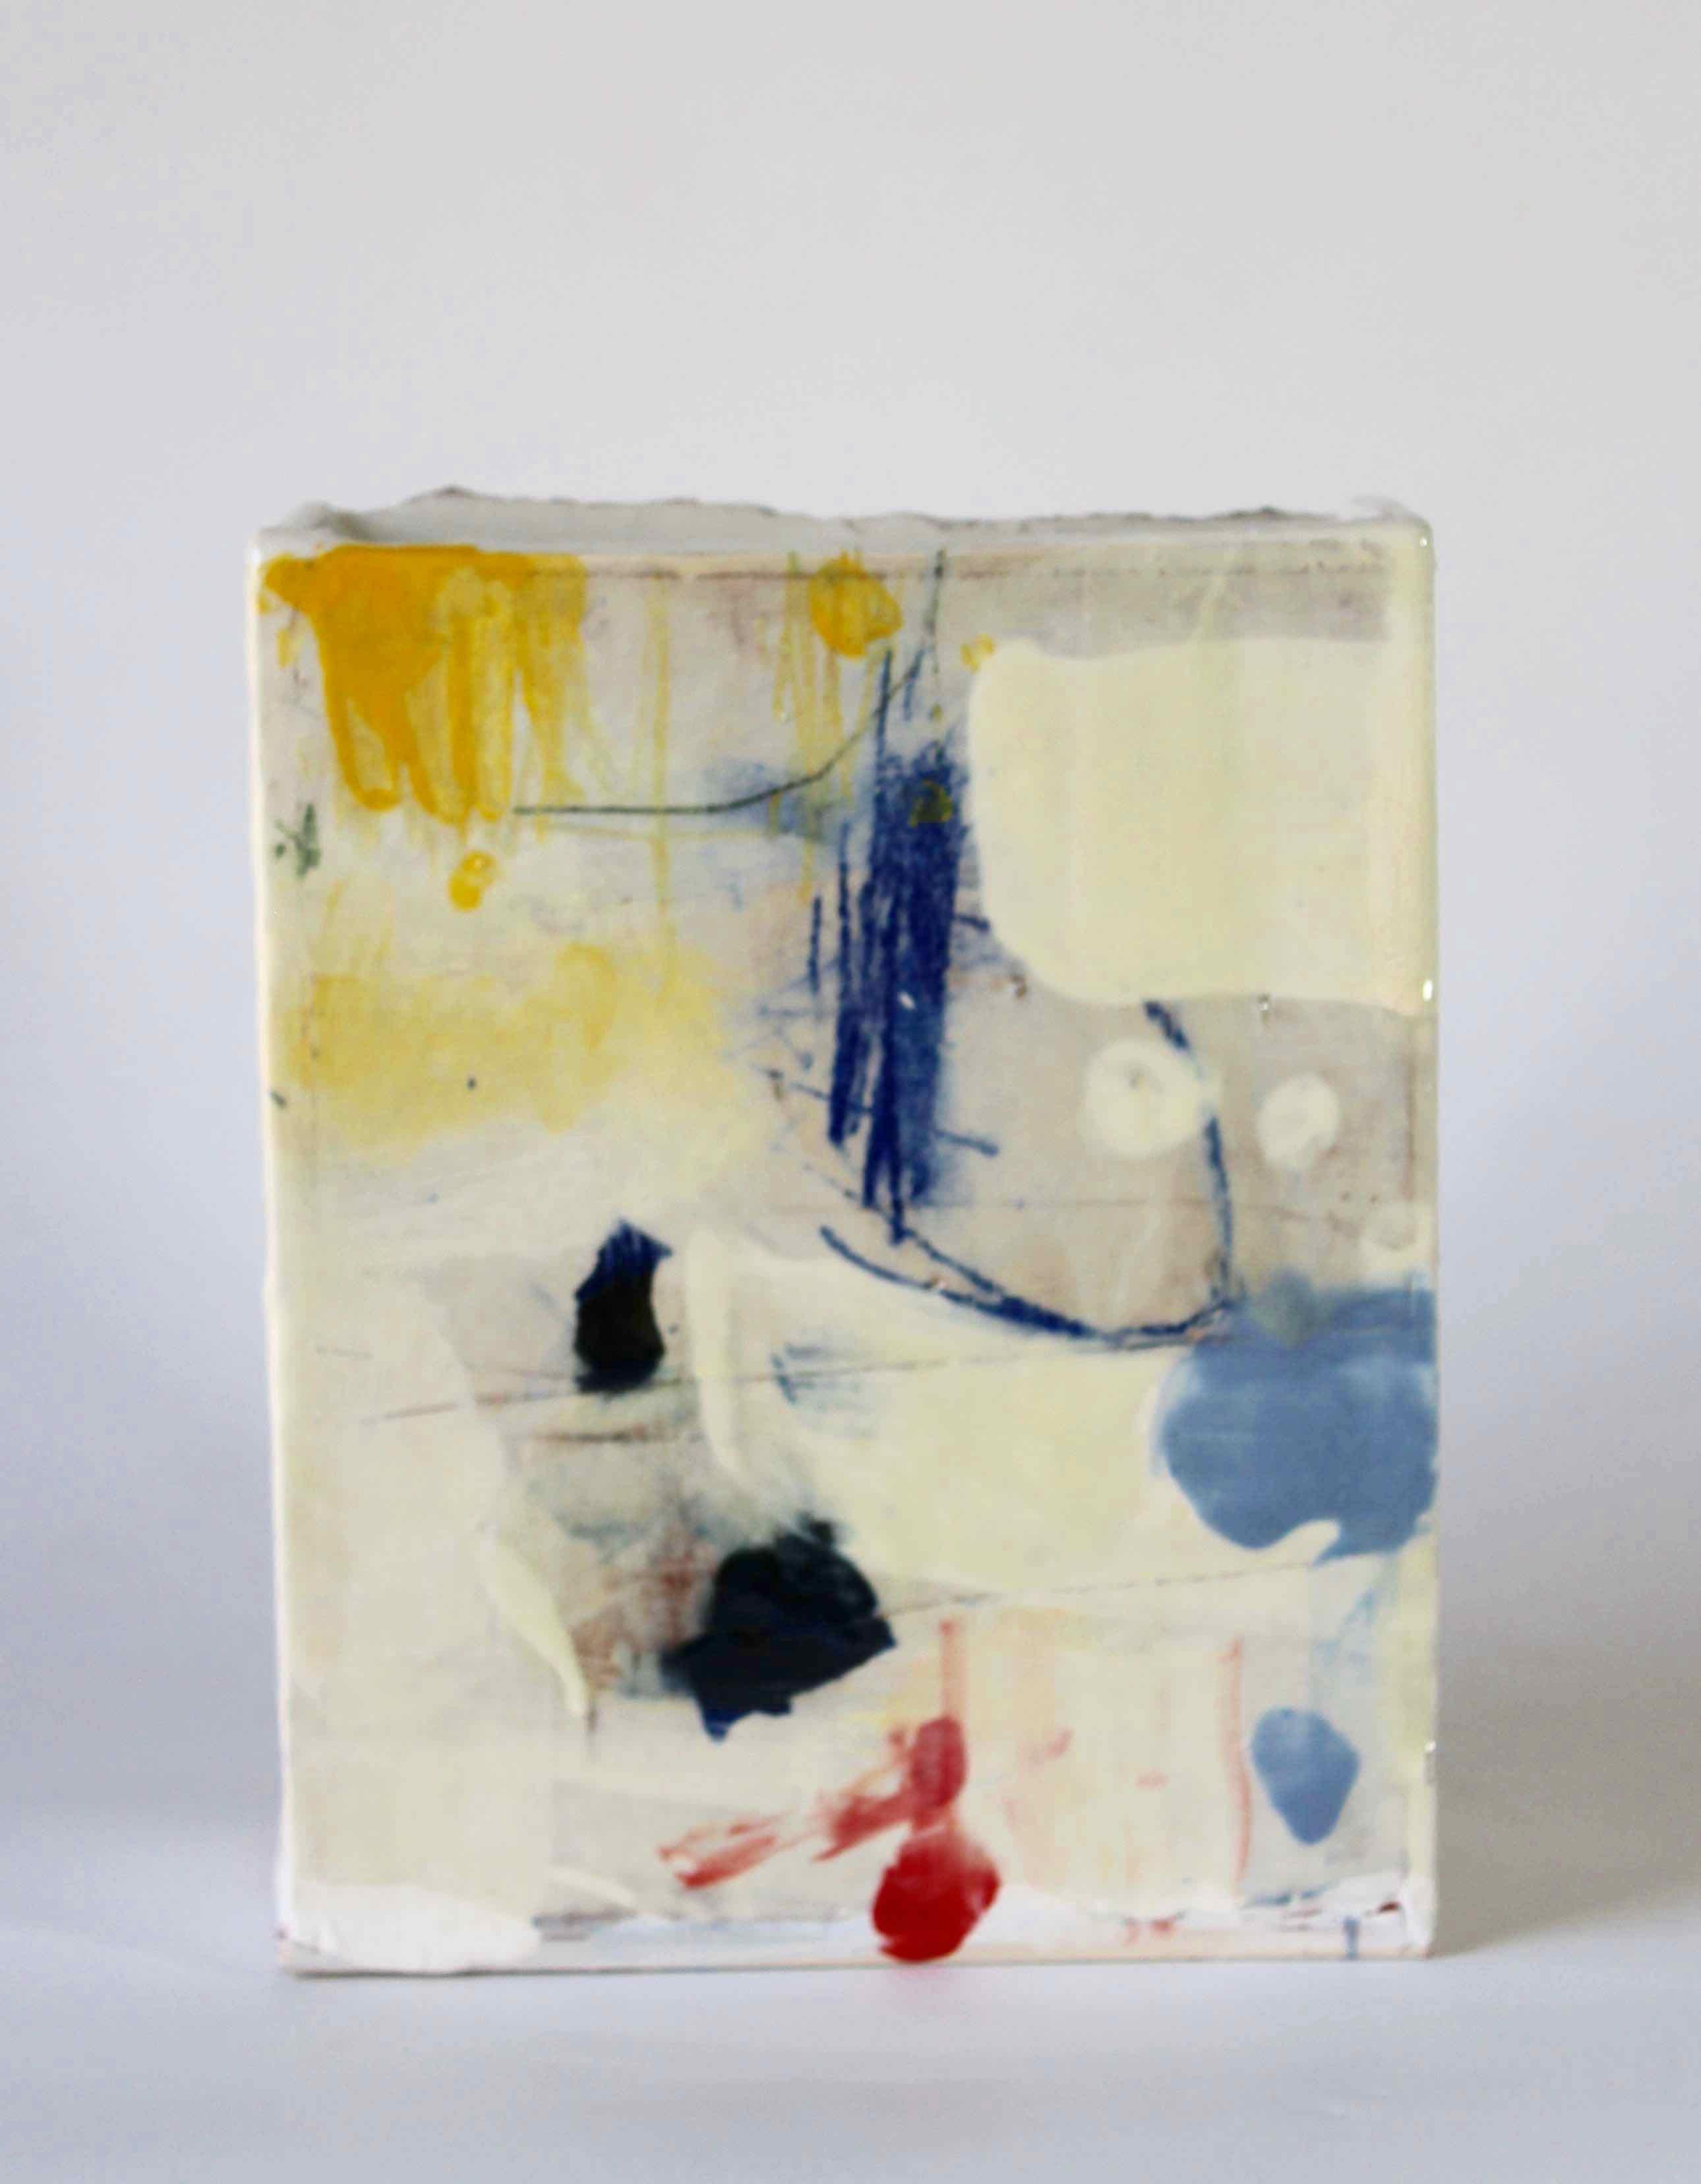 This ceramic vessel is one of Barry’s slab works, which are like three-dimensional paintings that you can walk around, and view from many angles.

Barry Stedman’s ceramics are influenced by drawings made within the land, exploring relationships